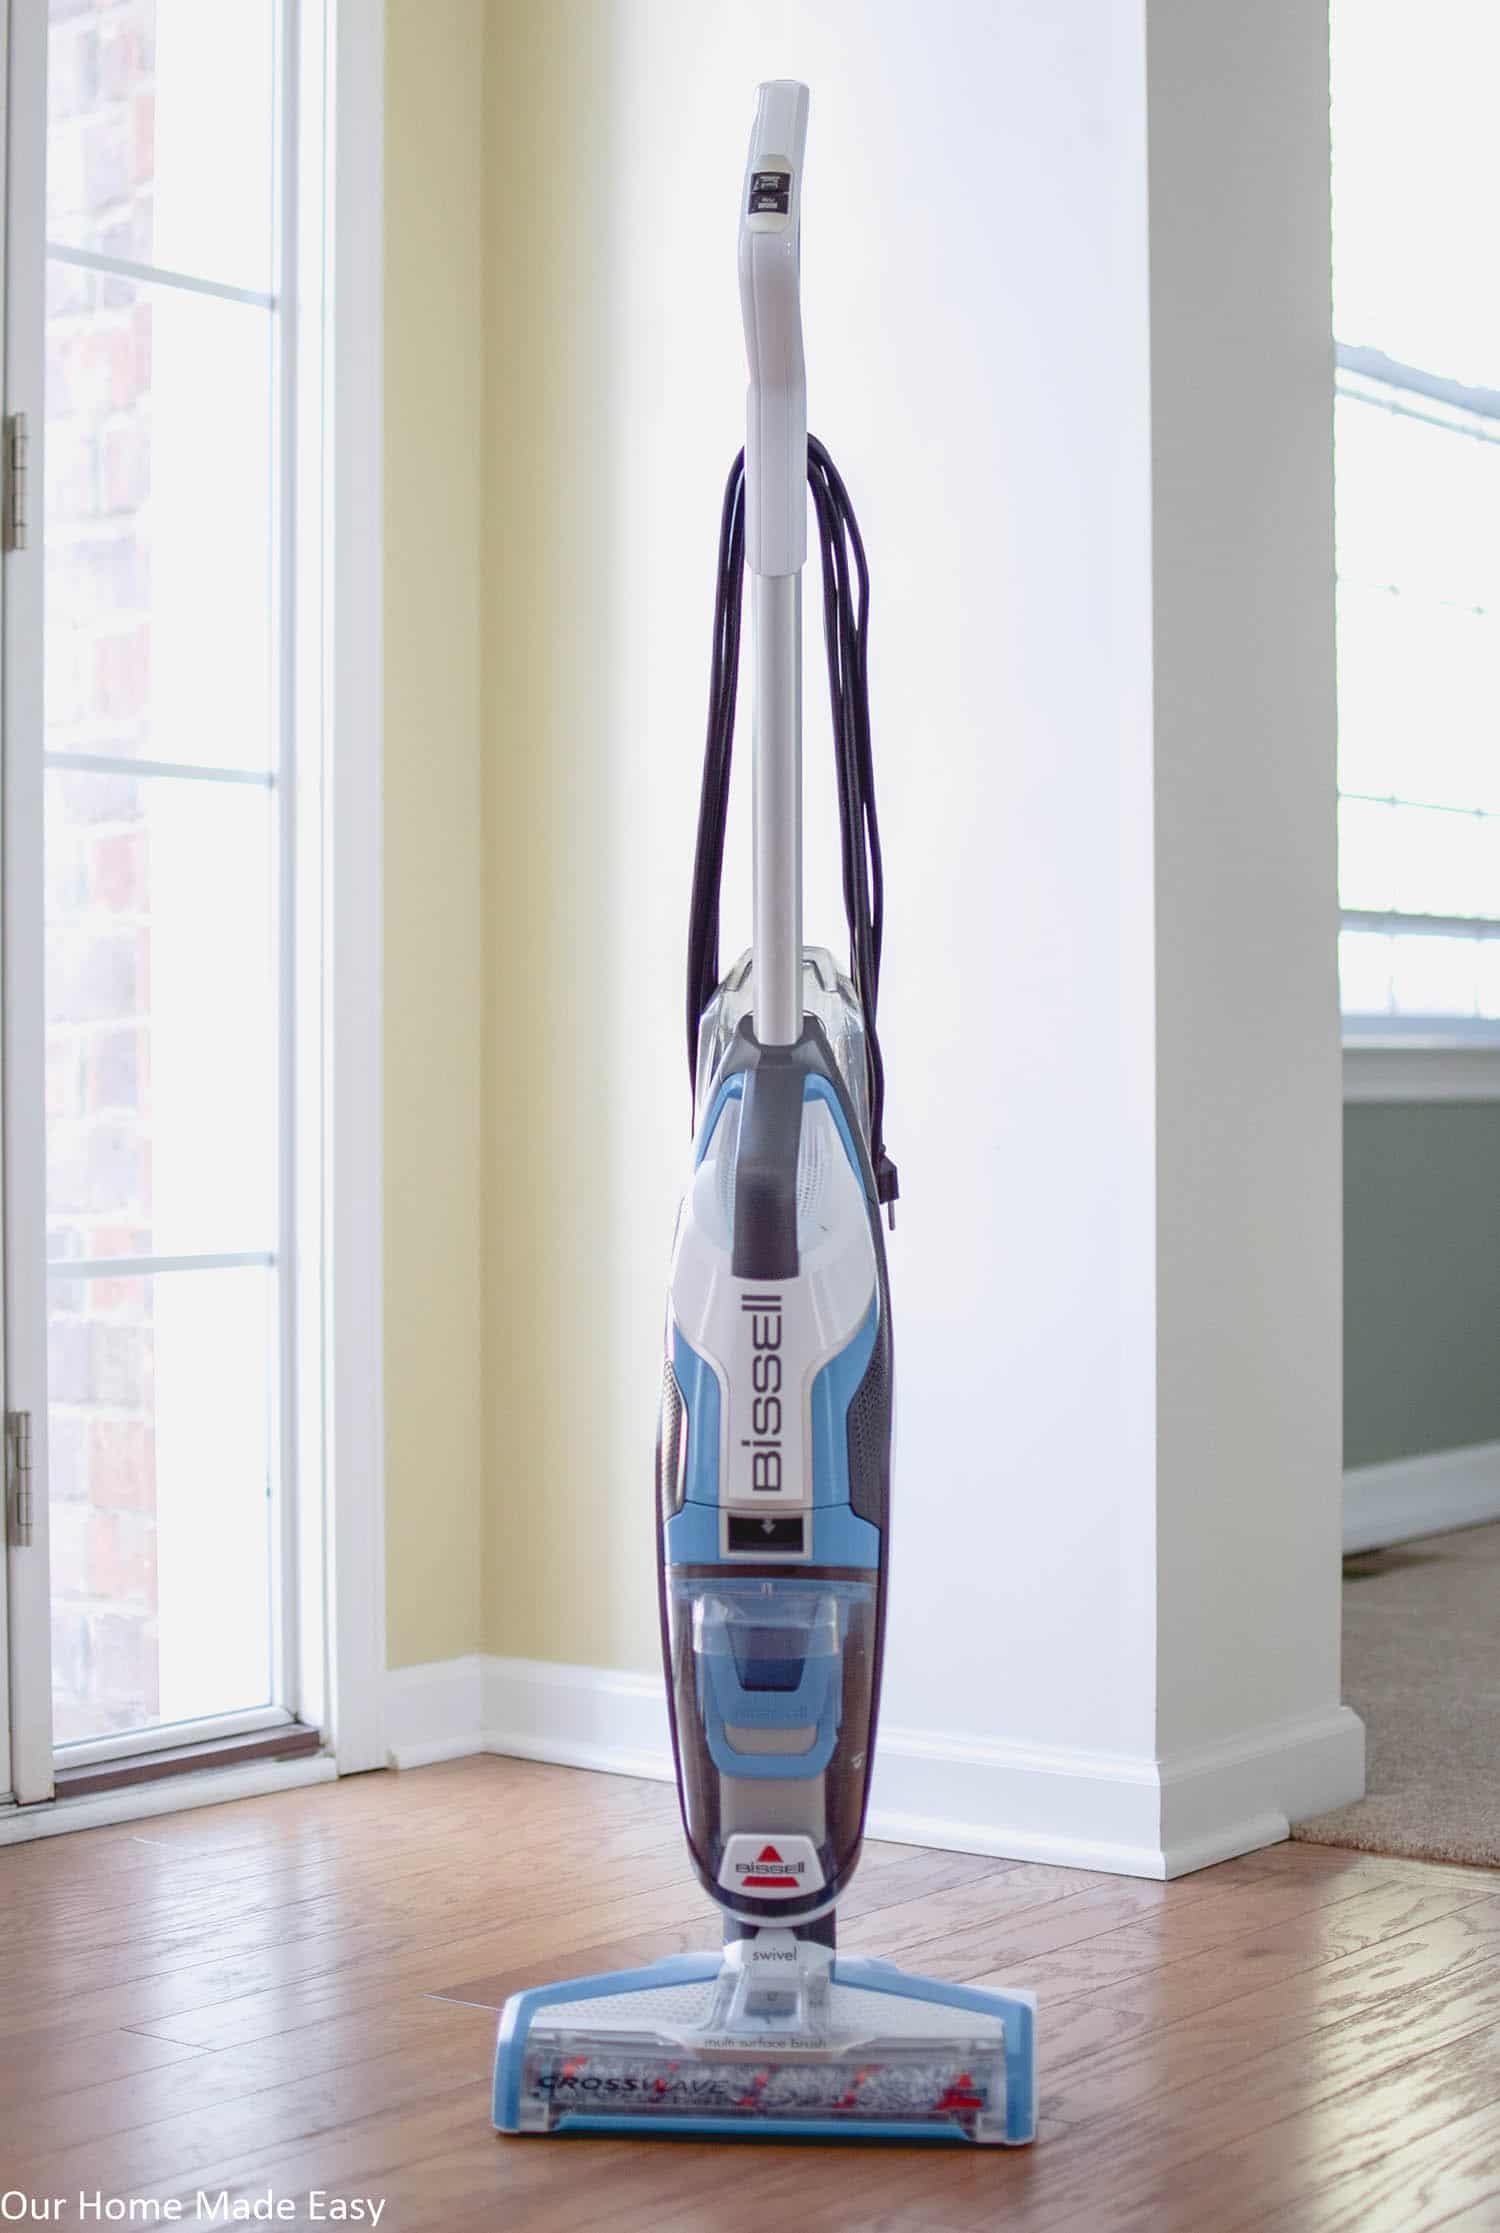 The Bissell CrossWave is the easiest way to clean hardwood and tile floors and carpets